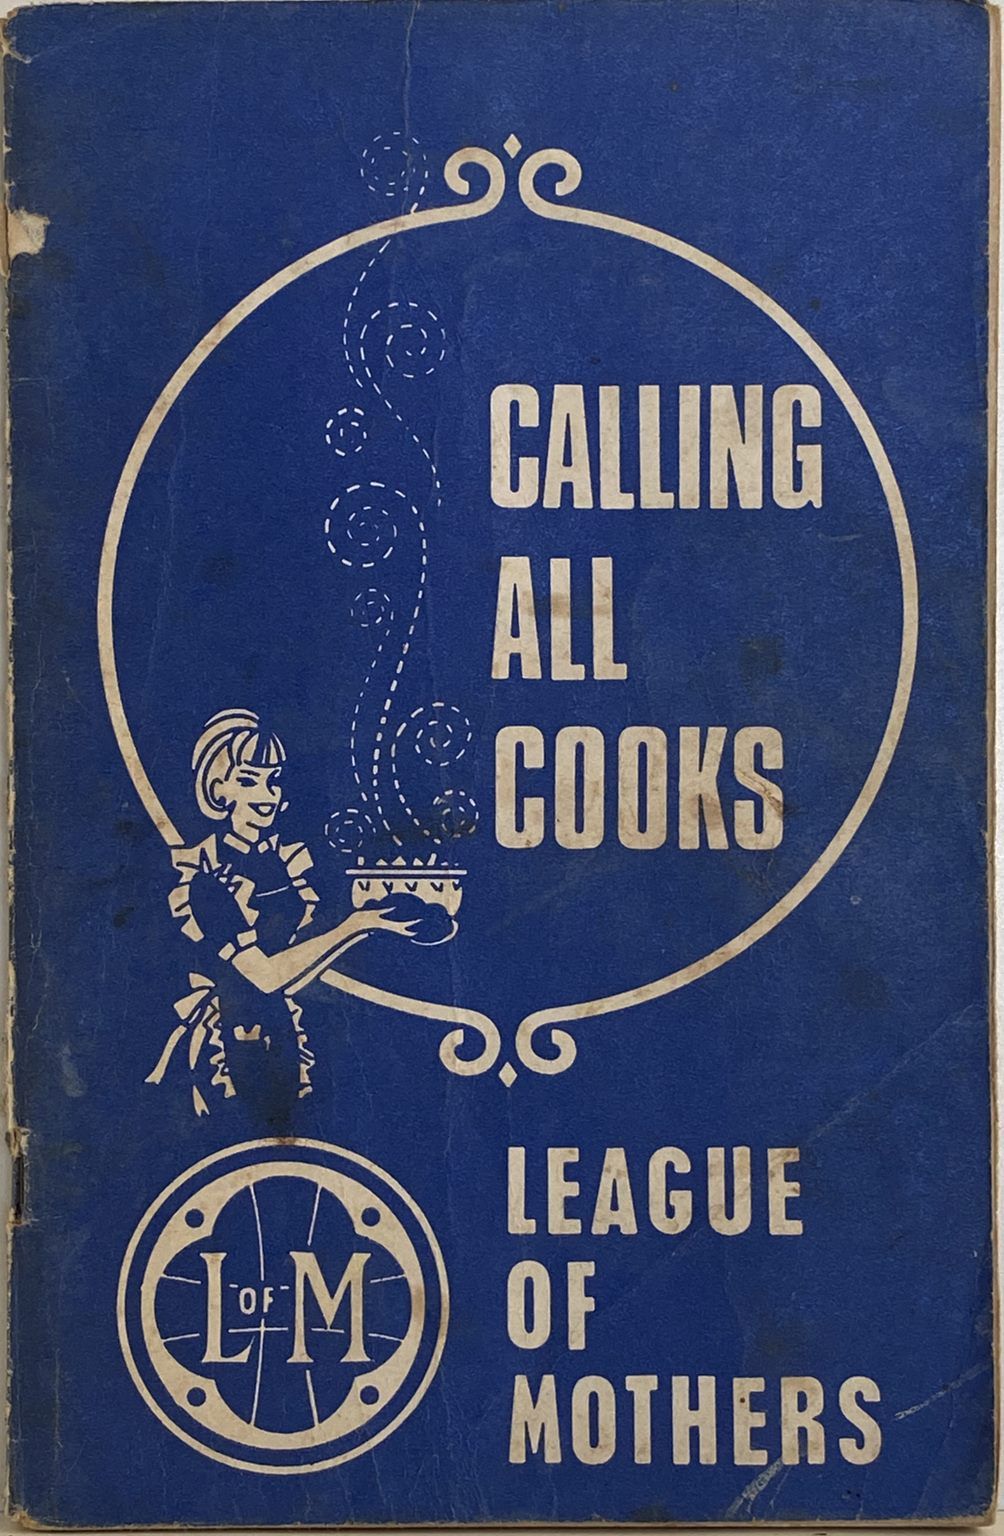 CALLING ALL COOKS - League of Mothers